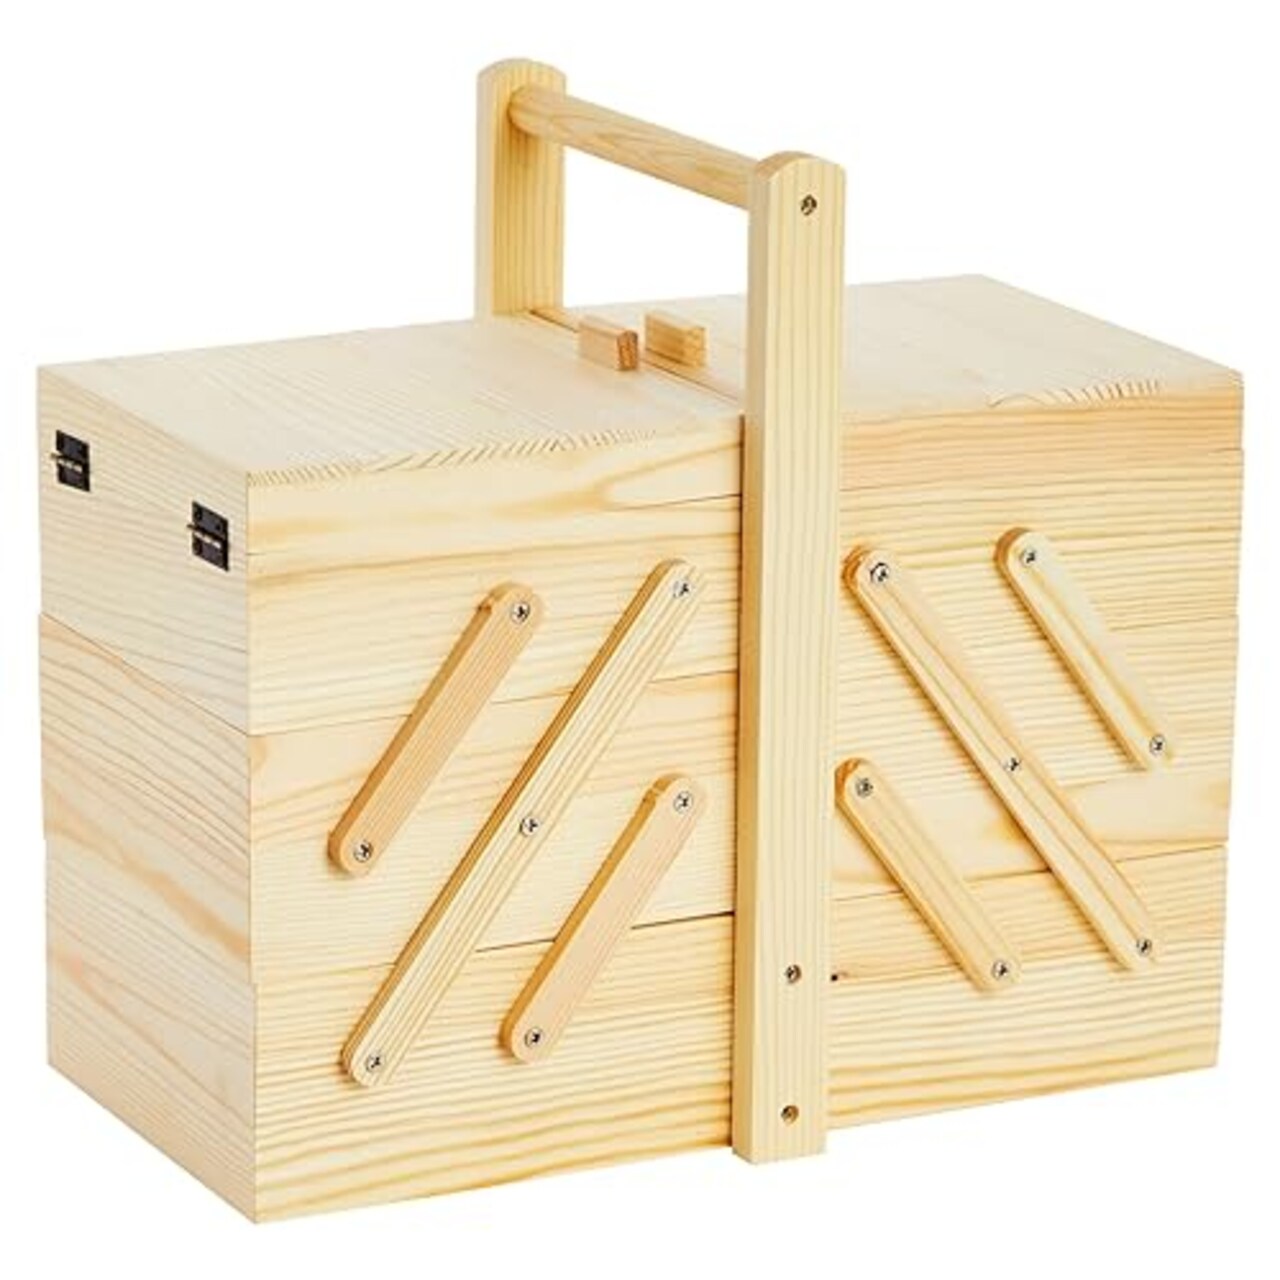 Juvale Wooden Sewing Box Organizer for Sewing Supplies with 3 Tier Drawers  for Craft Tools, Needles, Pincushions, Art Supplies, Thread Spool Organizer  (12.6 x 5.9 x 8.3 Inches)